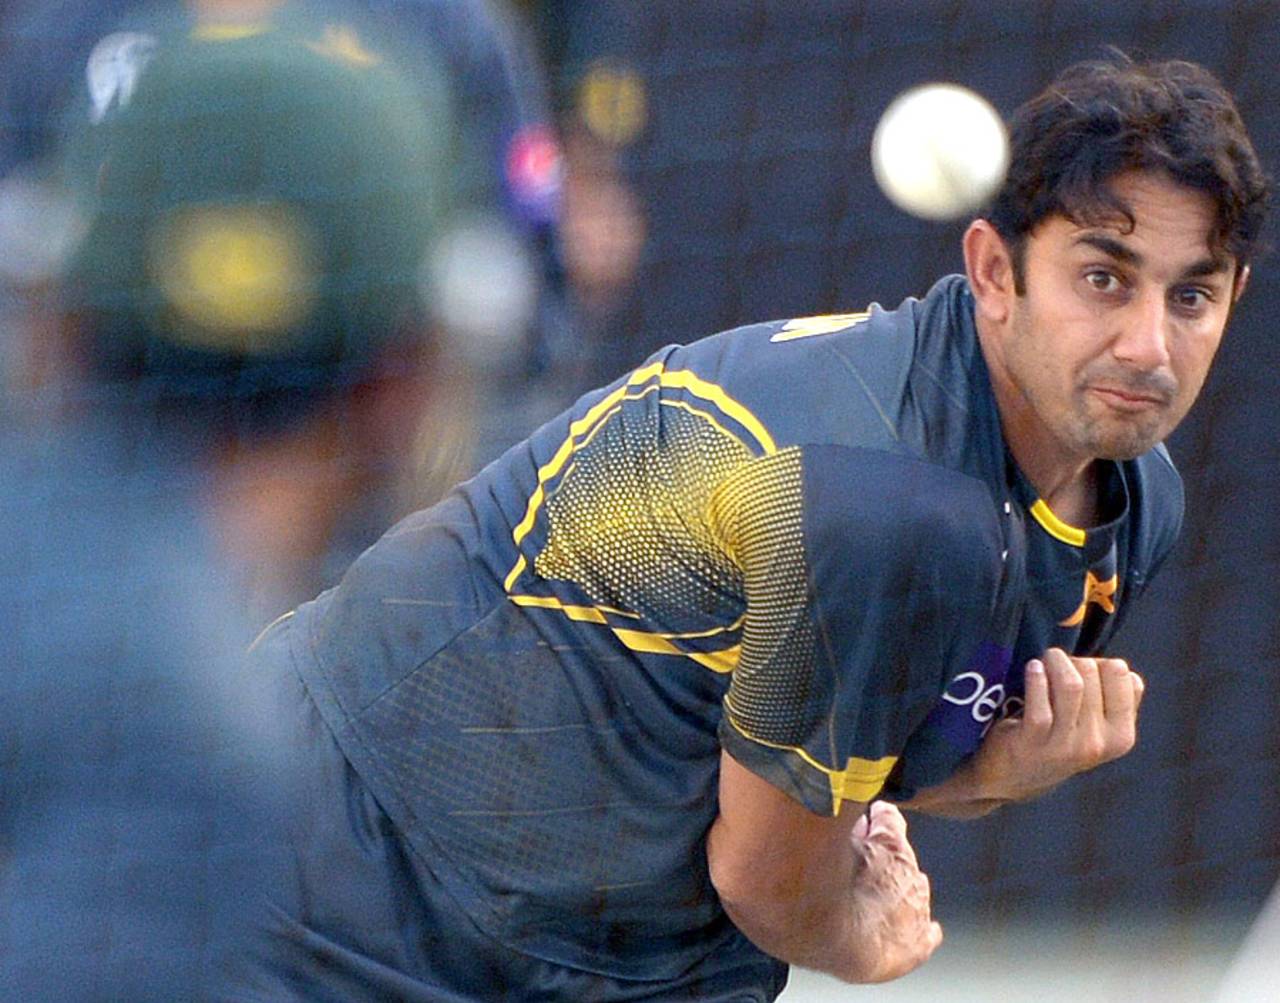 "The team of experts led by Saqlain Mushtaq is working in two sessions with Saeed every day," said a PCB spokesperson&nbsp;&nbsp;&bull;&nbsp;&nbsp;AFP